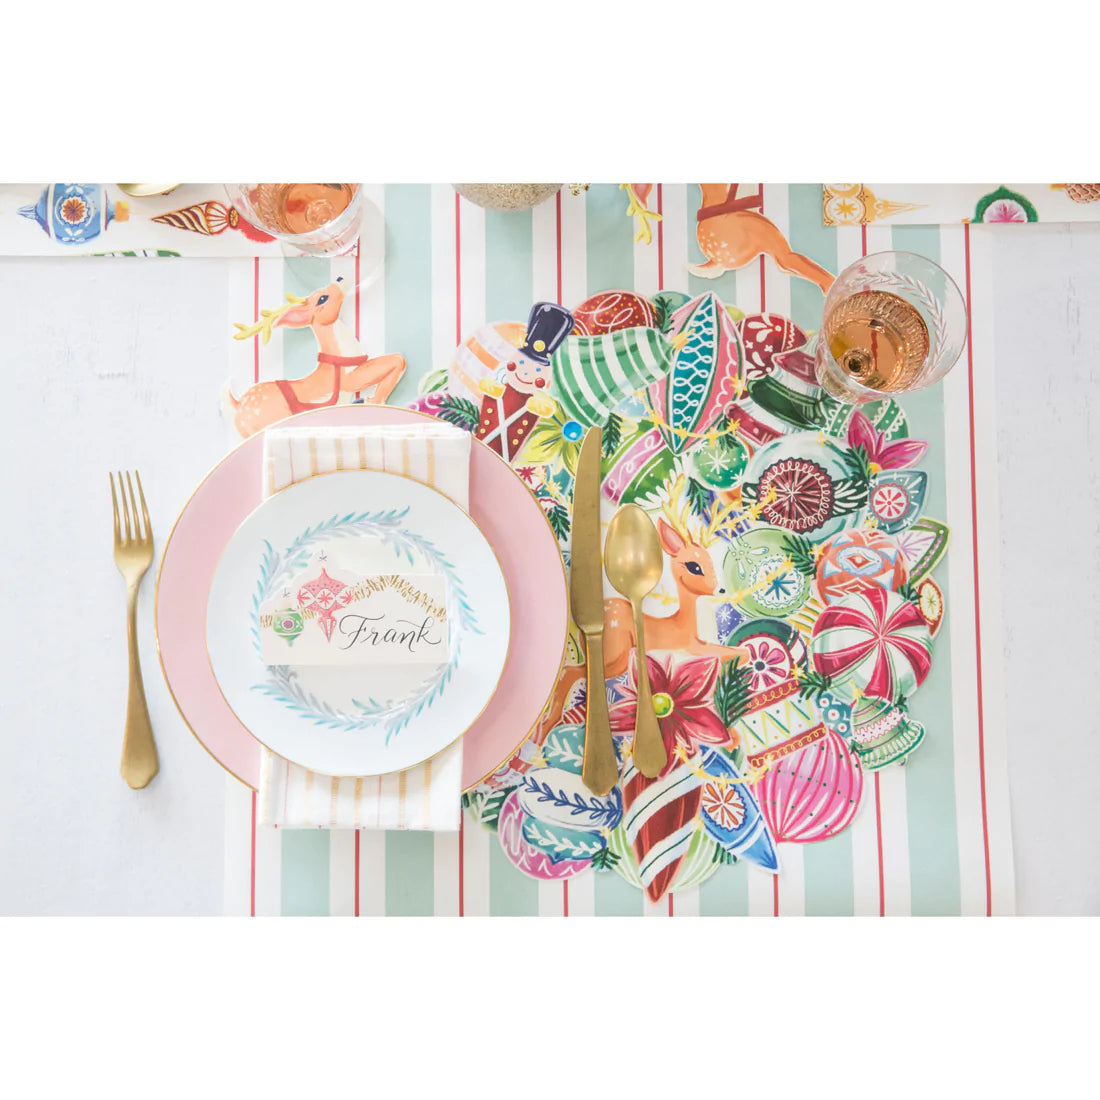 Hester & Cook- Die Cut Yuletide Treasure Wreath Placemats- 12 sheets